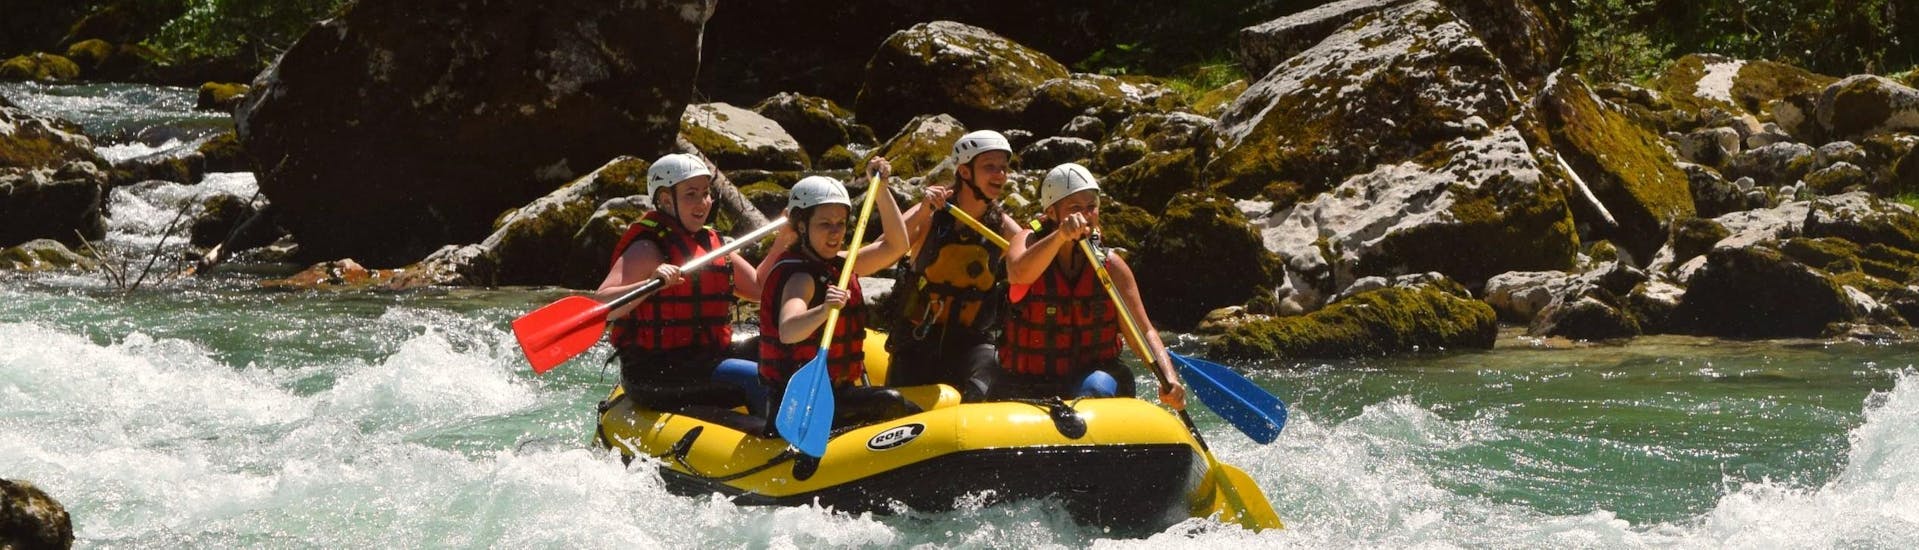 Rafting on the Salza River in Palfau - Half Day Tour with Deep Roots Adventures Palfau - Hero image